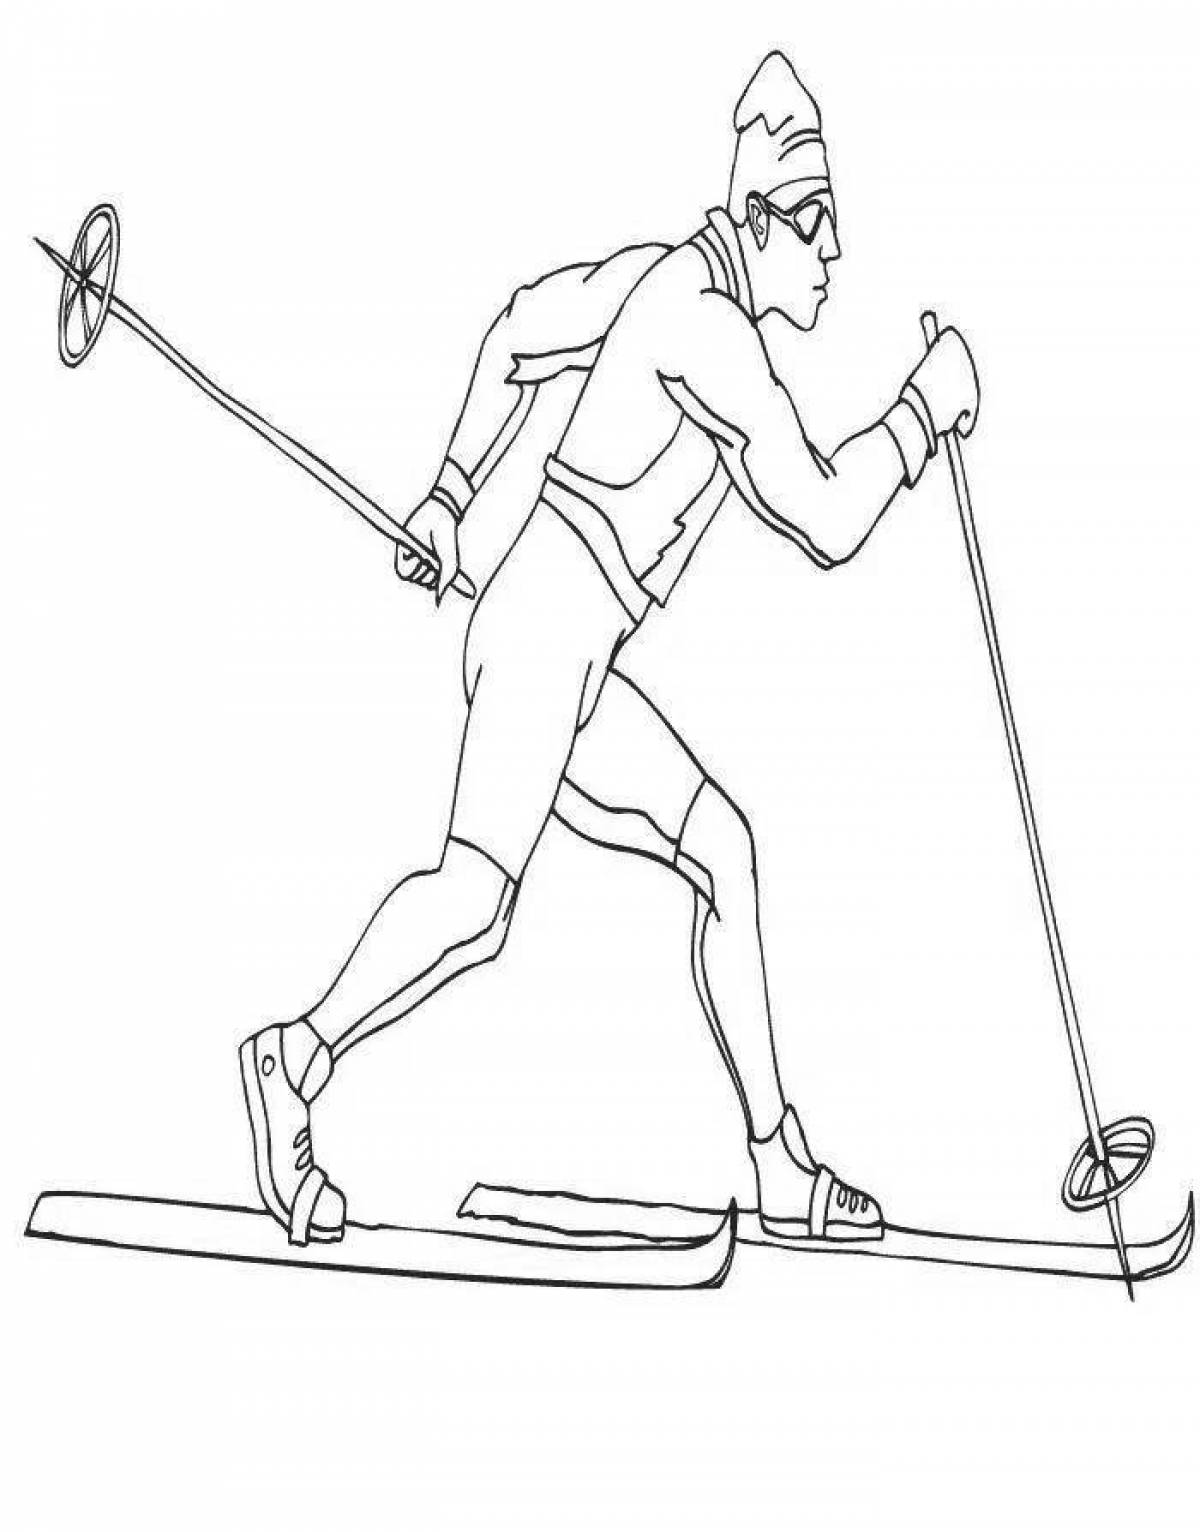 An animated skiing coloring page